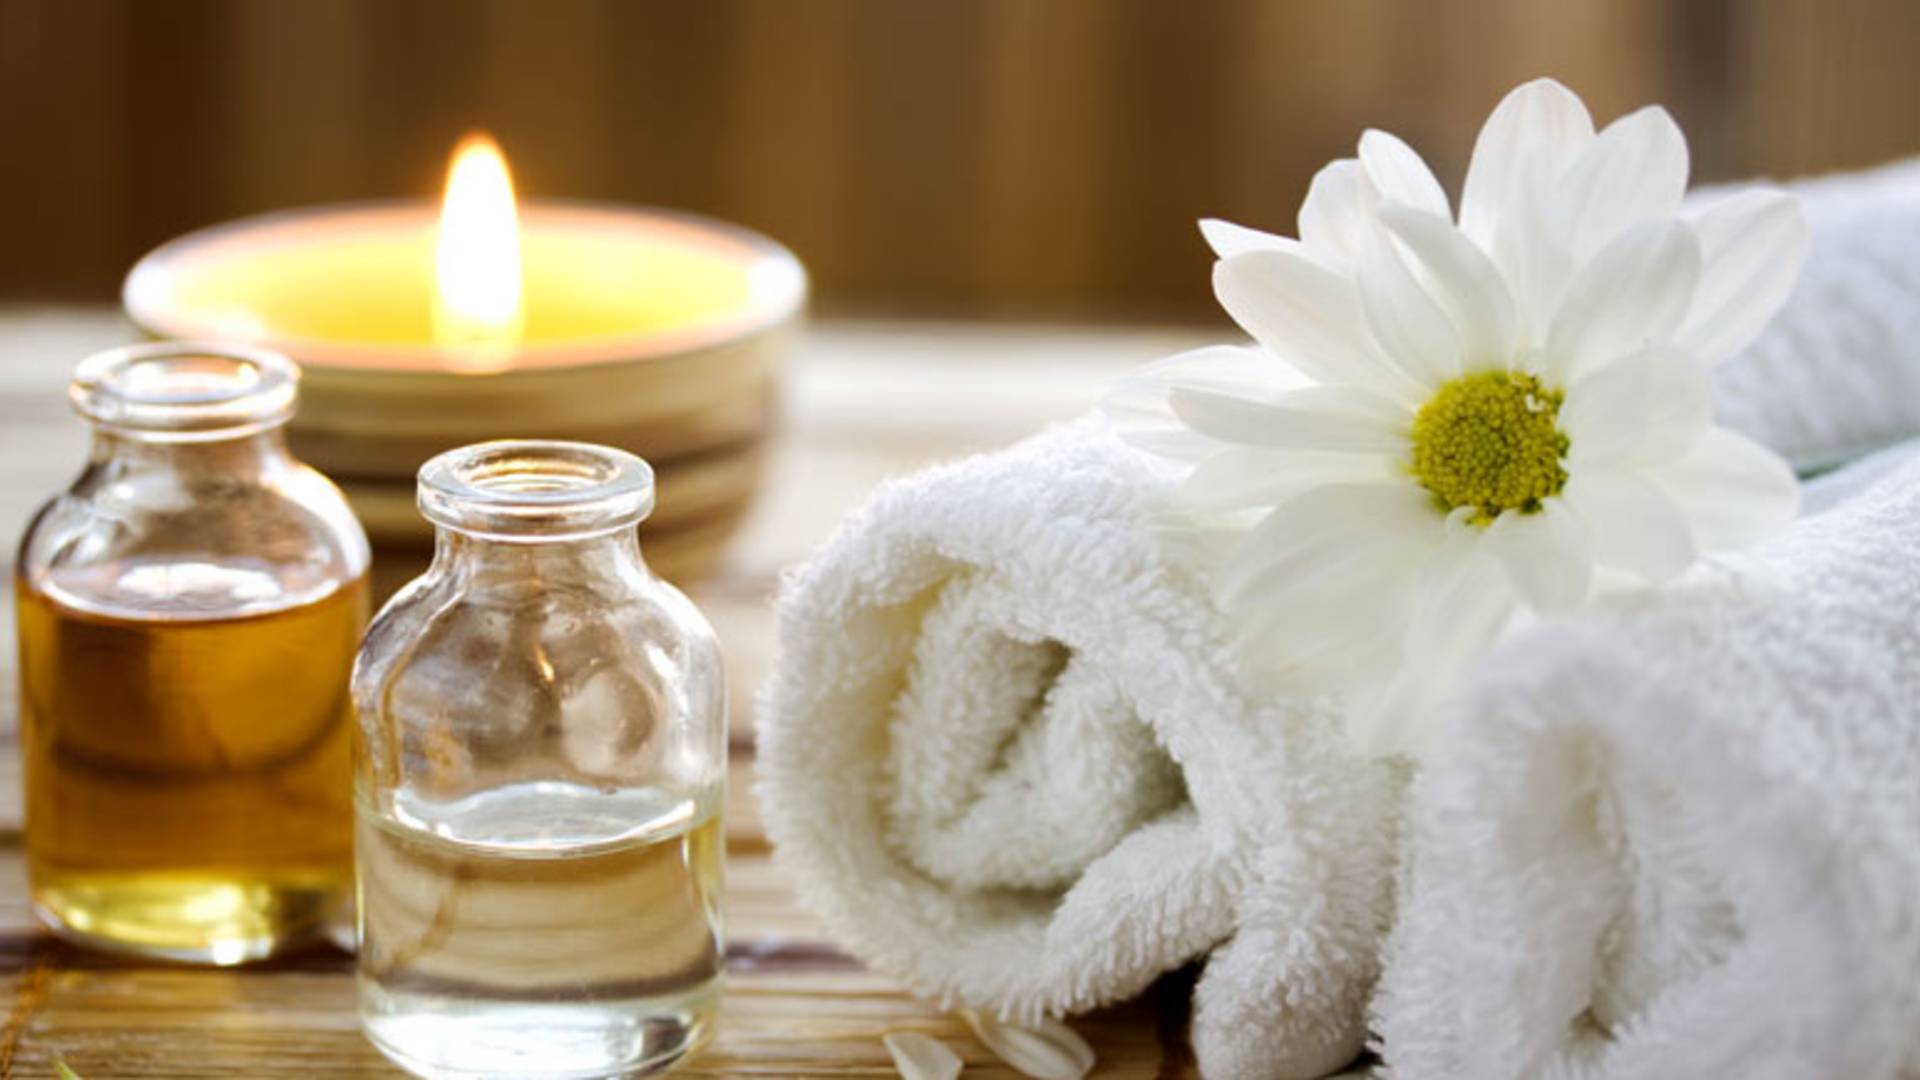 Rolled towels and jars of essential oils in spa